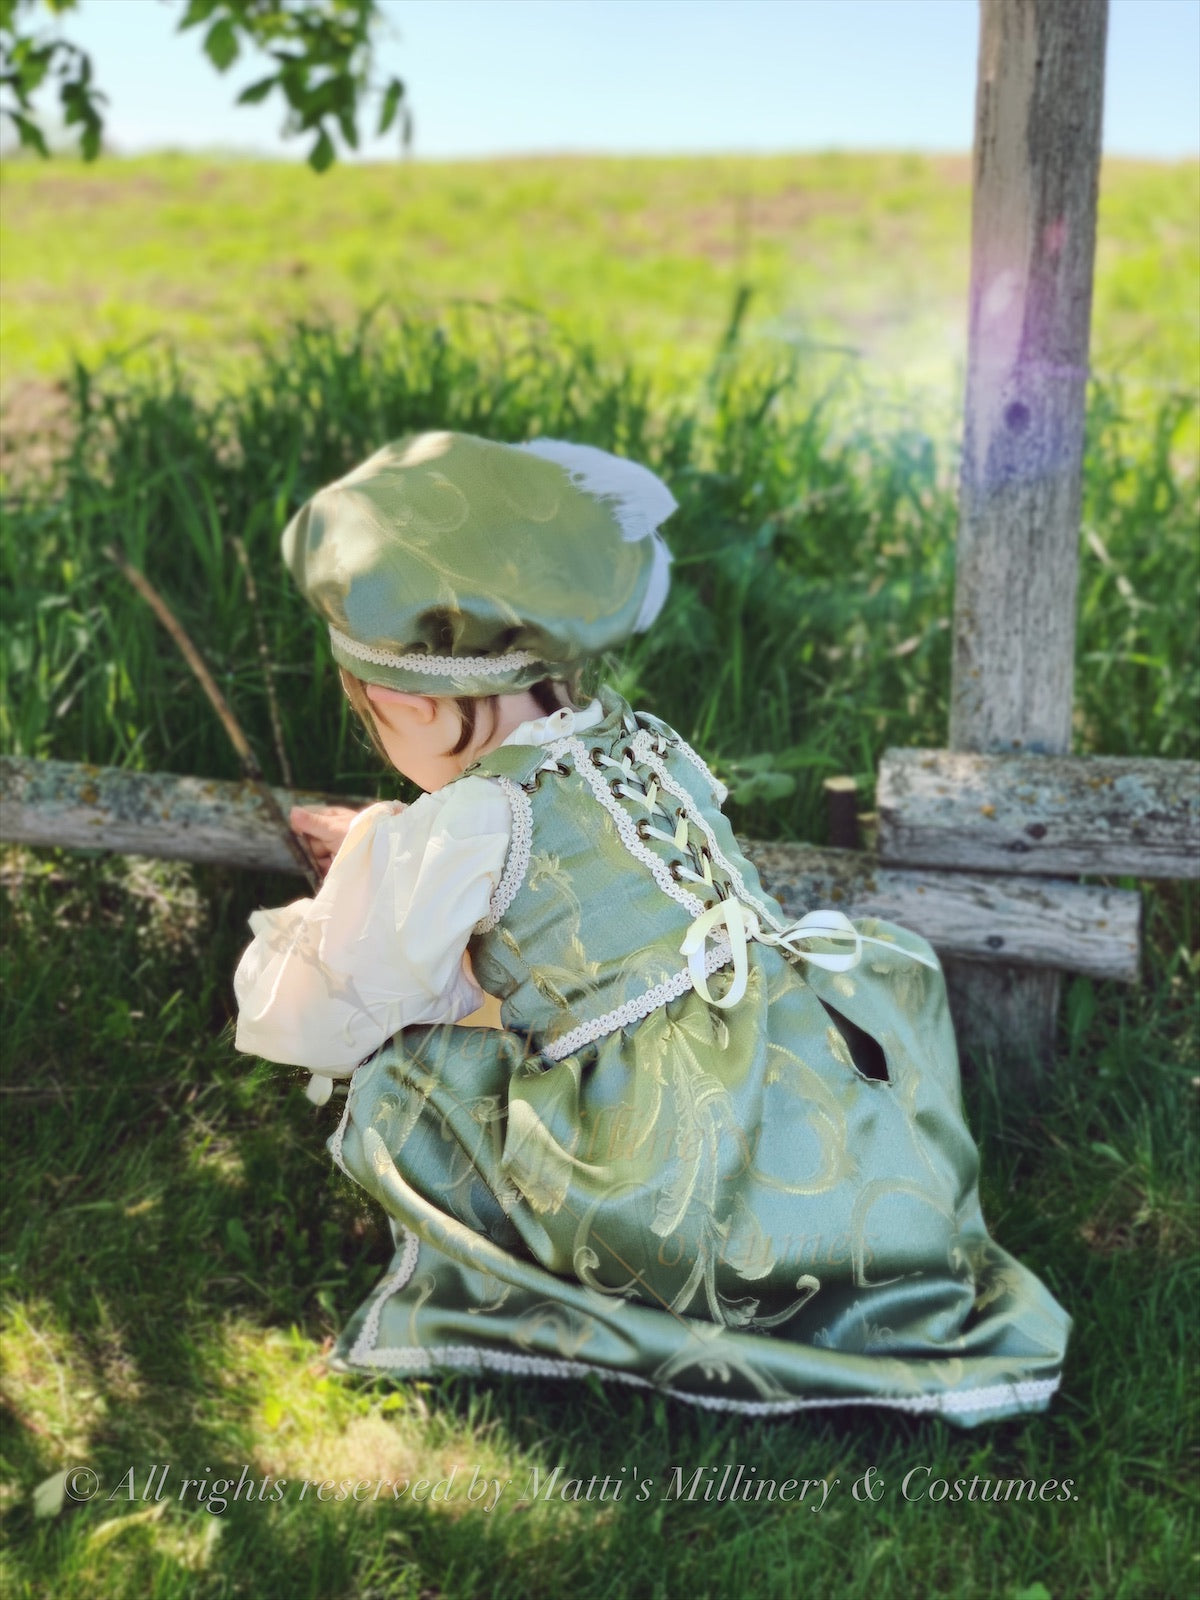 Childrens Renaissance Lil’ Ren Medieval Renaissance Court Outfit with chemise, overdress and muffin cap CUSTOM size and color